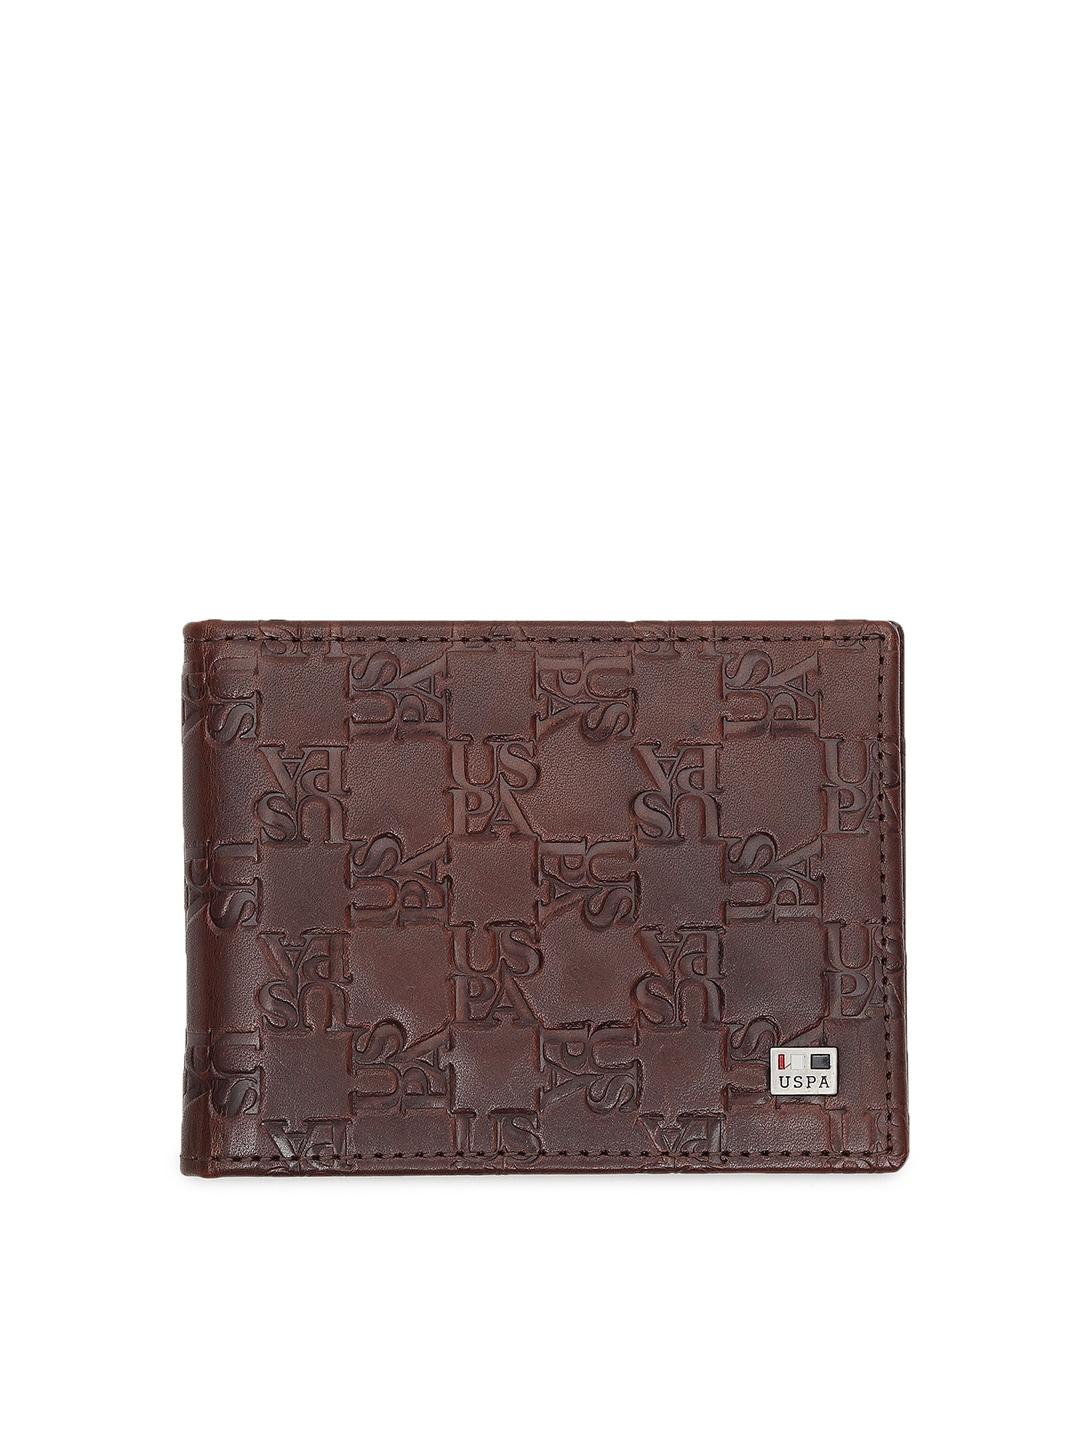 u-s-polo-assn-men-brown-typography-textured-leather-two-fold-wallet